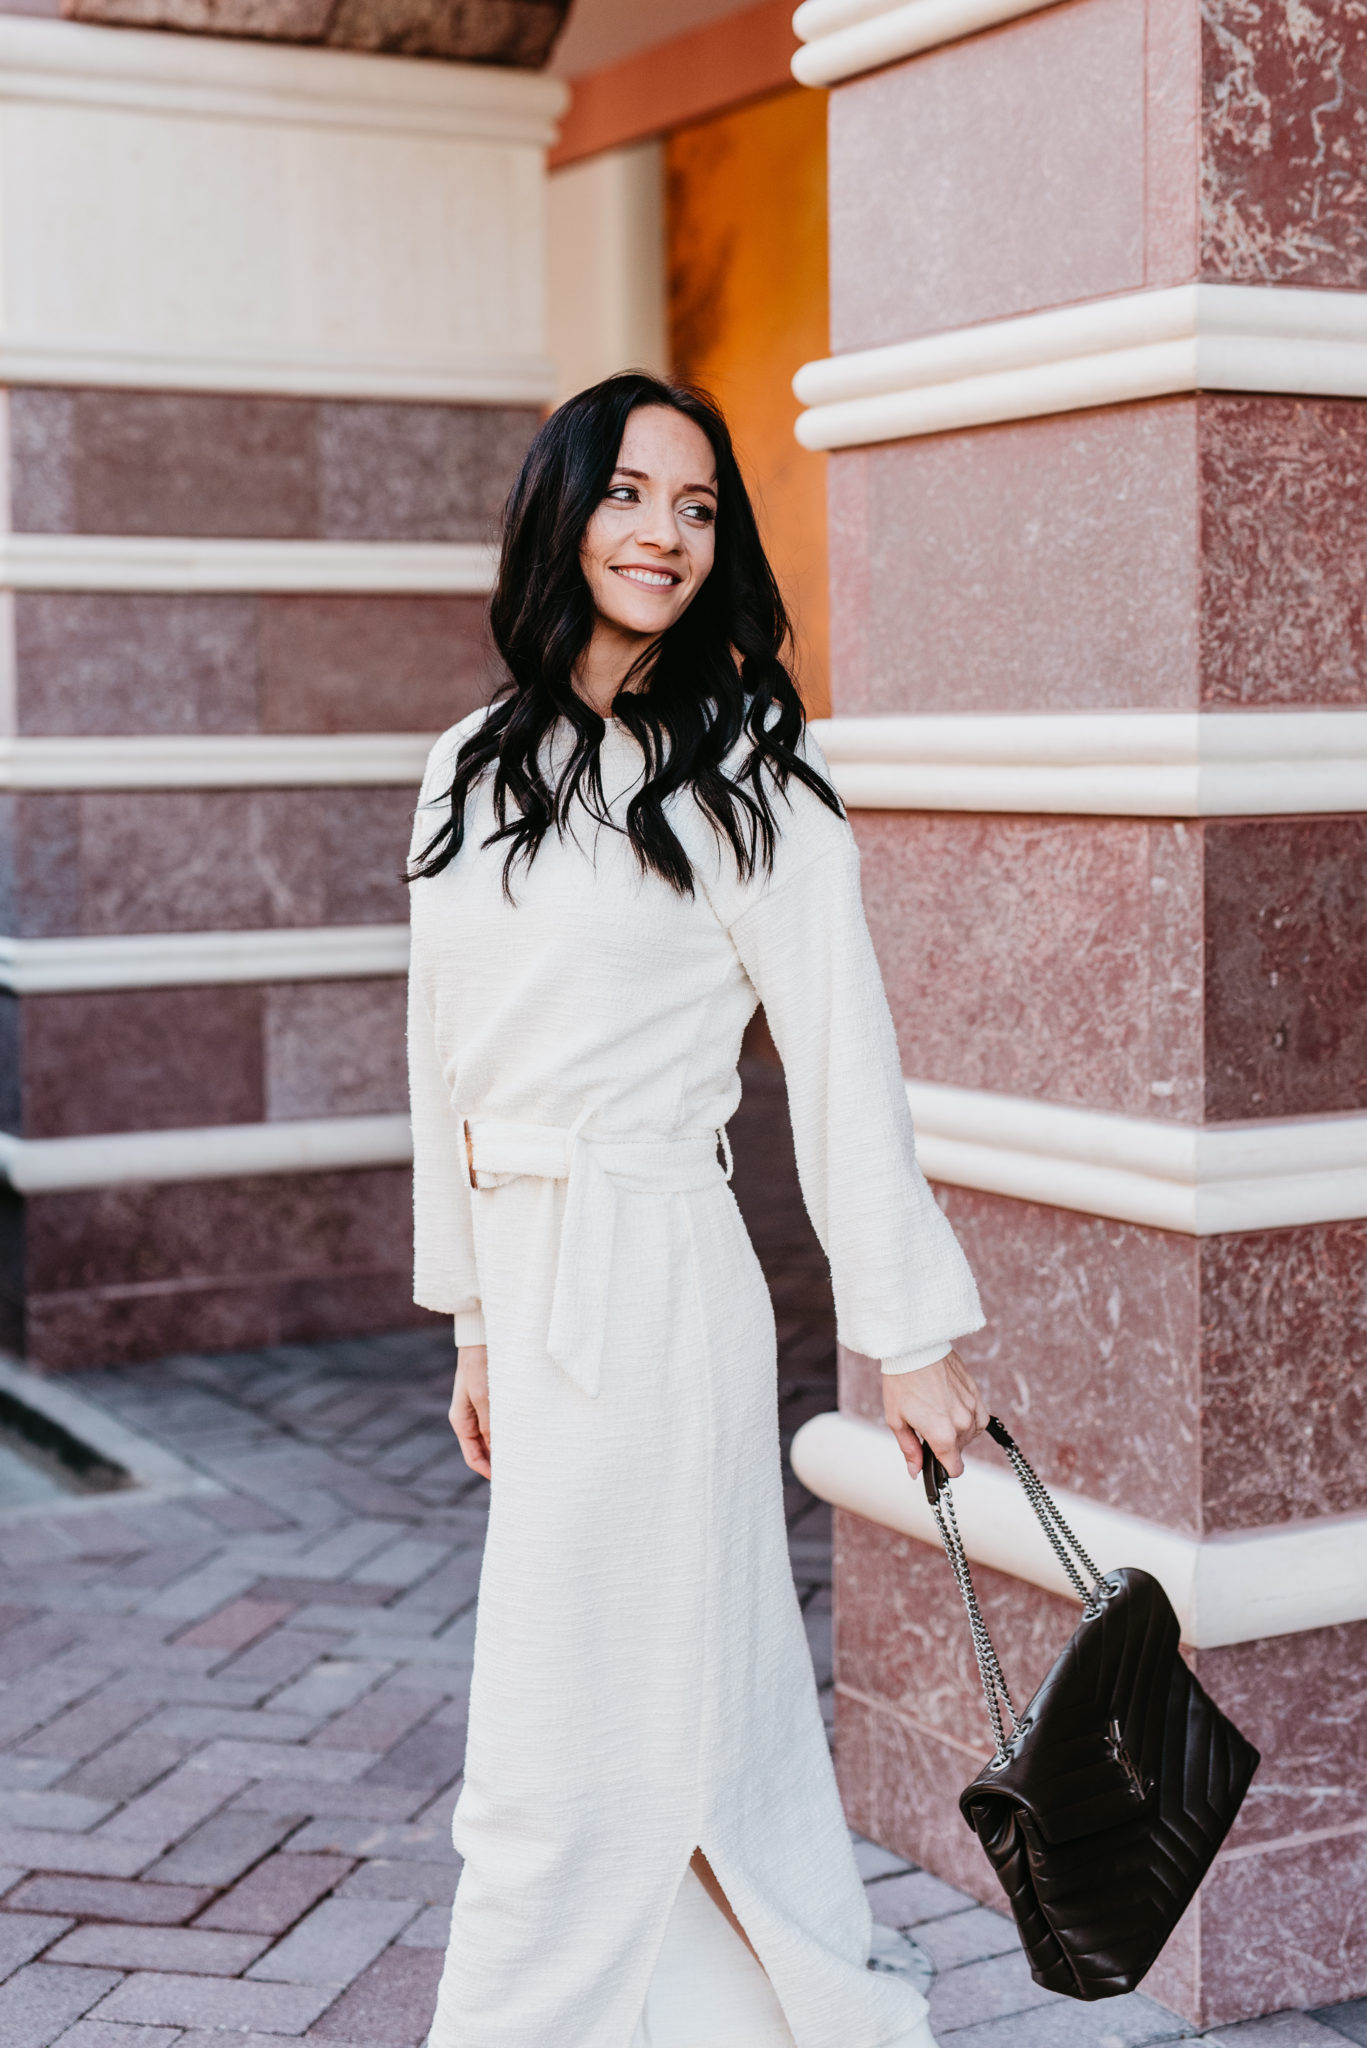 Cute Spring dress look styled by top US fashion blog, Outfits & Outings: image of a woman wearing a white Anthropologie belted dress, Yves Saint Laurent shoulder bag, and Marc Fisher white booties